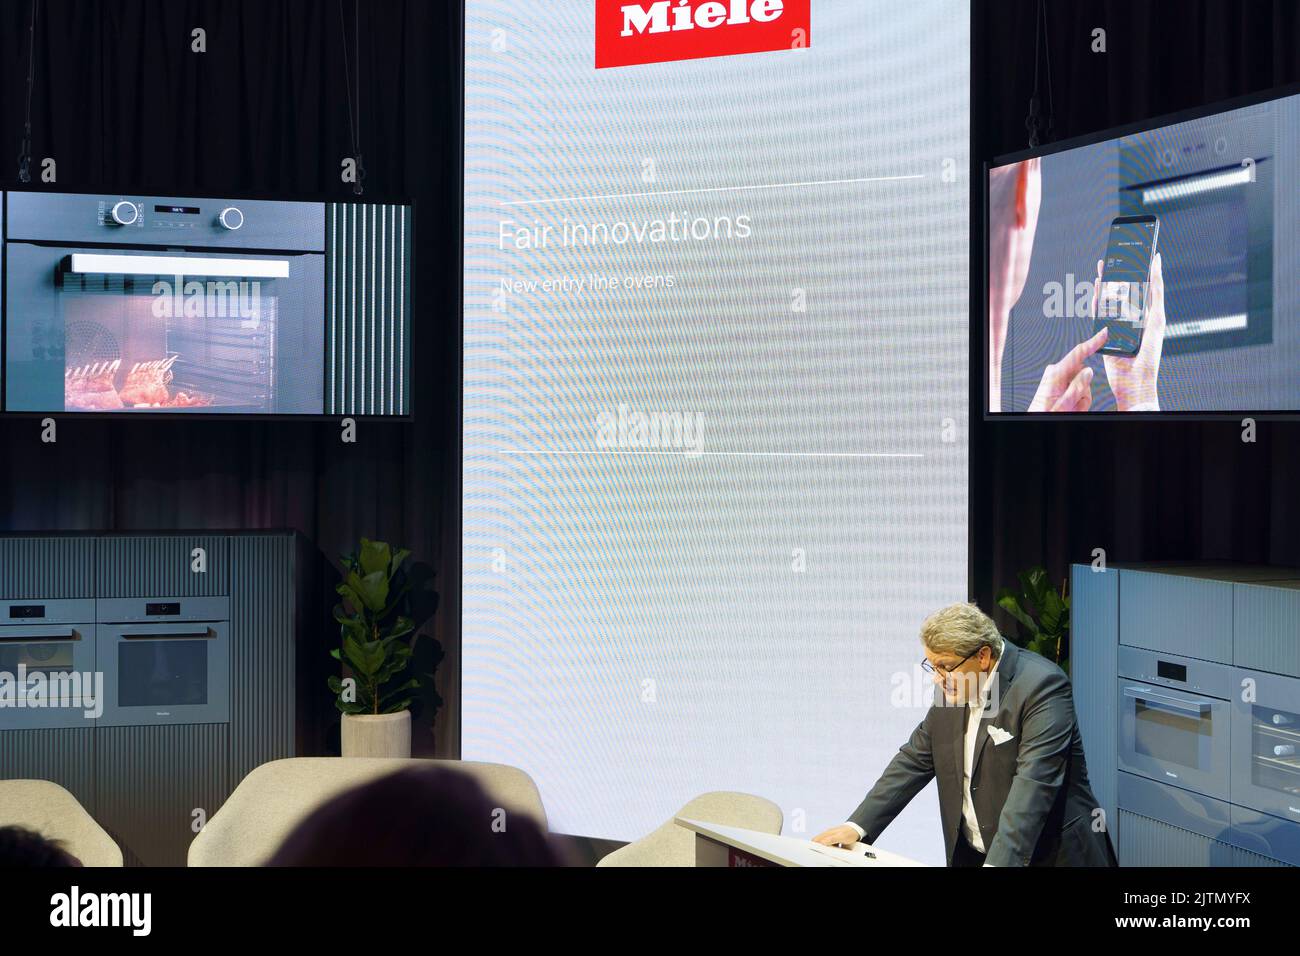 Miele Press conference during IFA 2022 Berlin Stock Photo